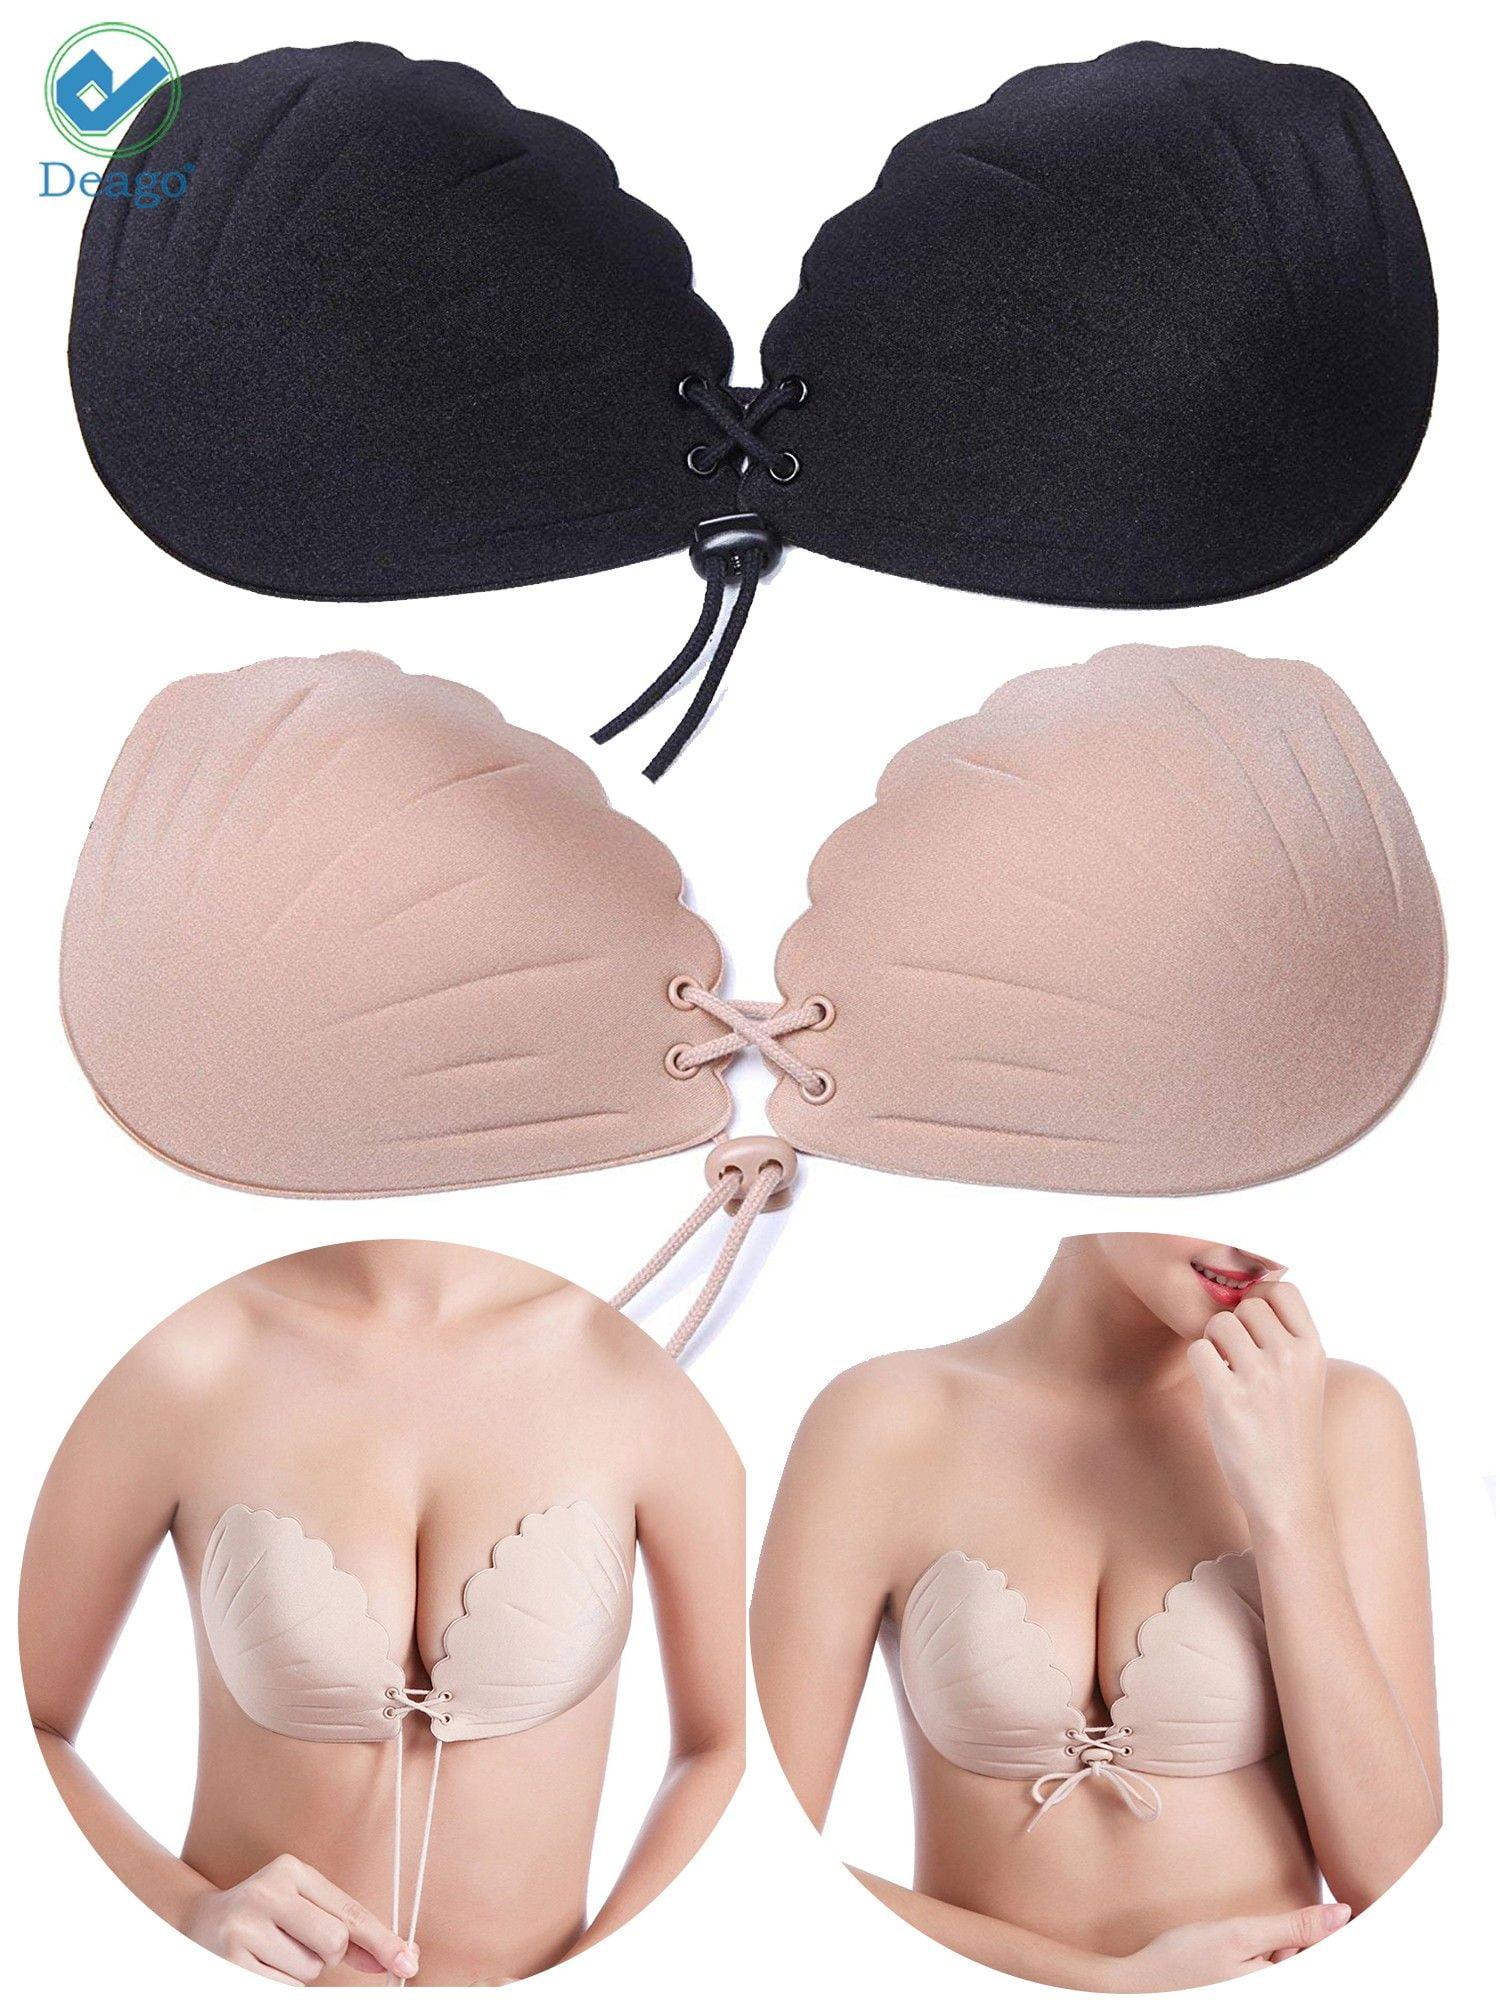 2 Pack Adhesive Bra Strapless Adhesive Bra Push Up Backless Bra for Women C-Cup